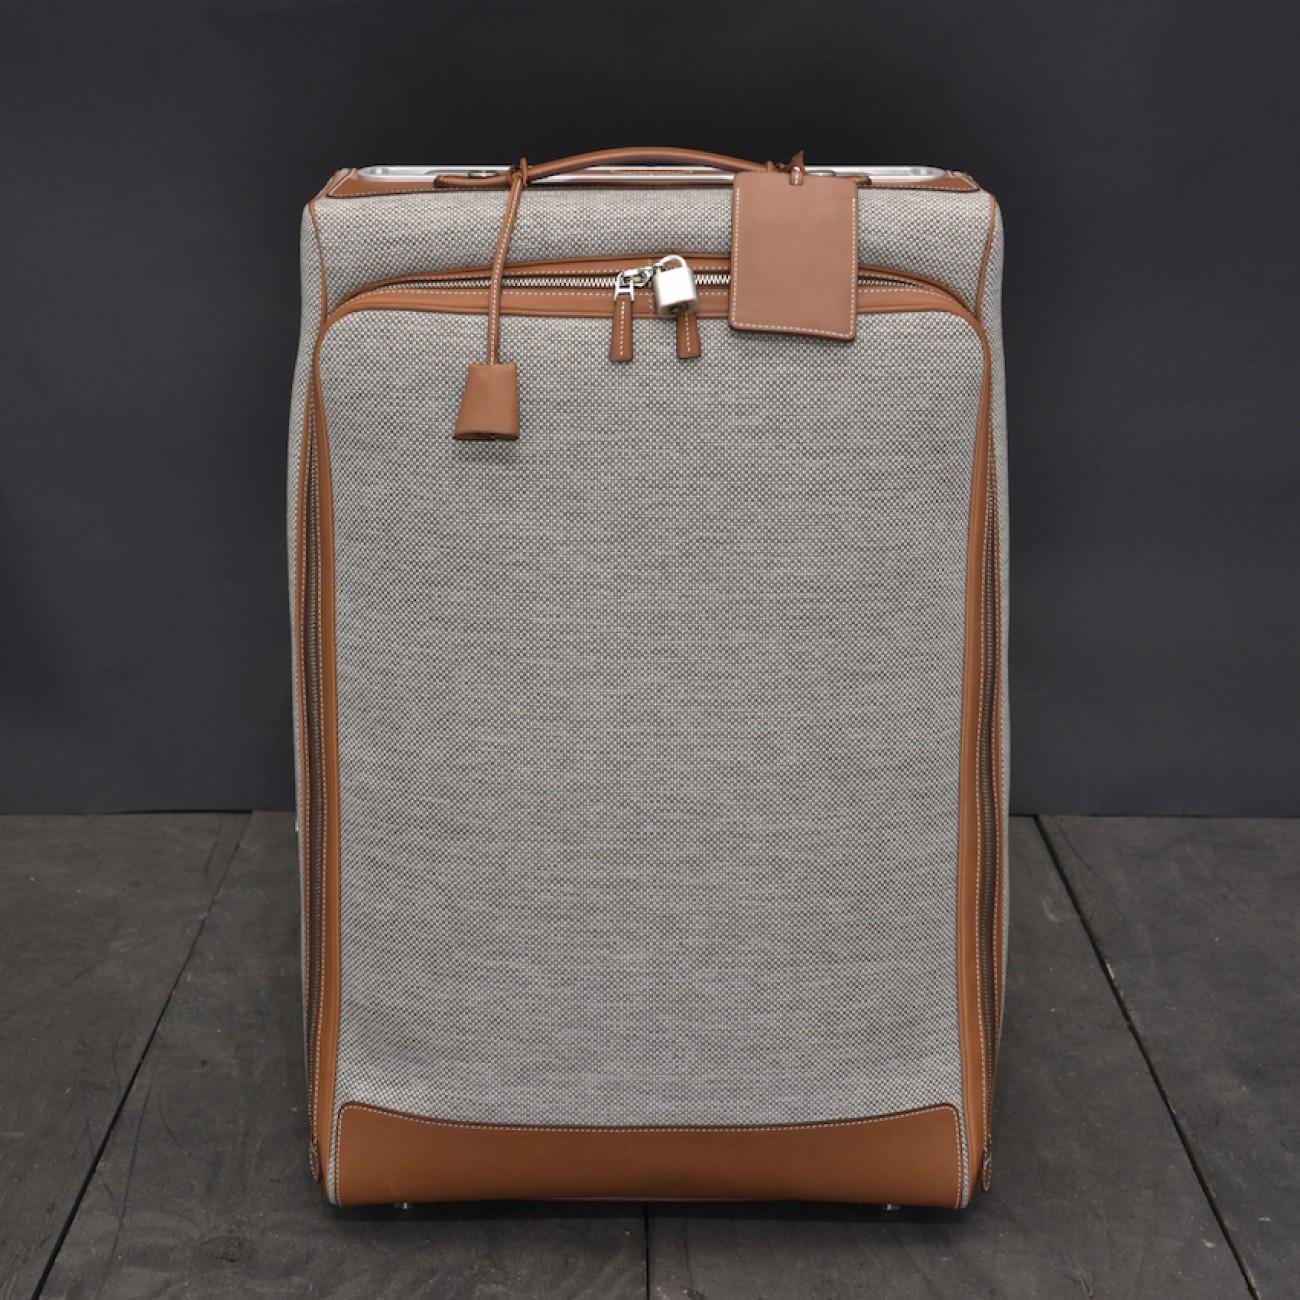 hermes rolling luggage